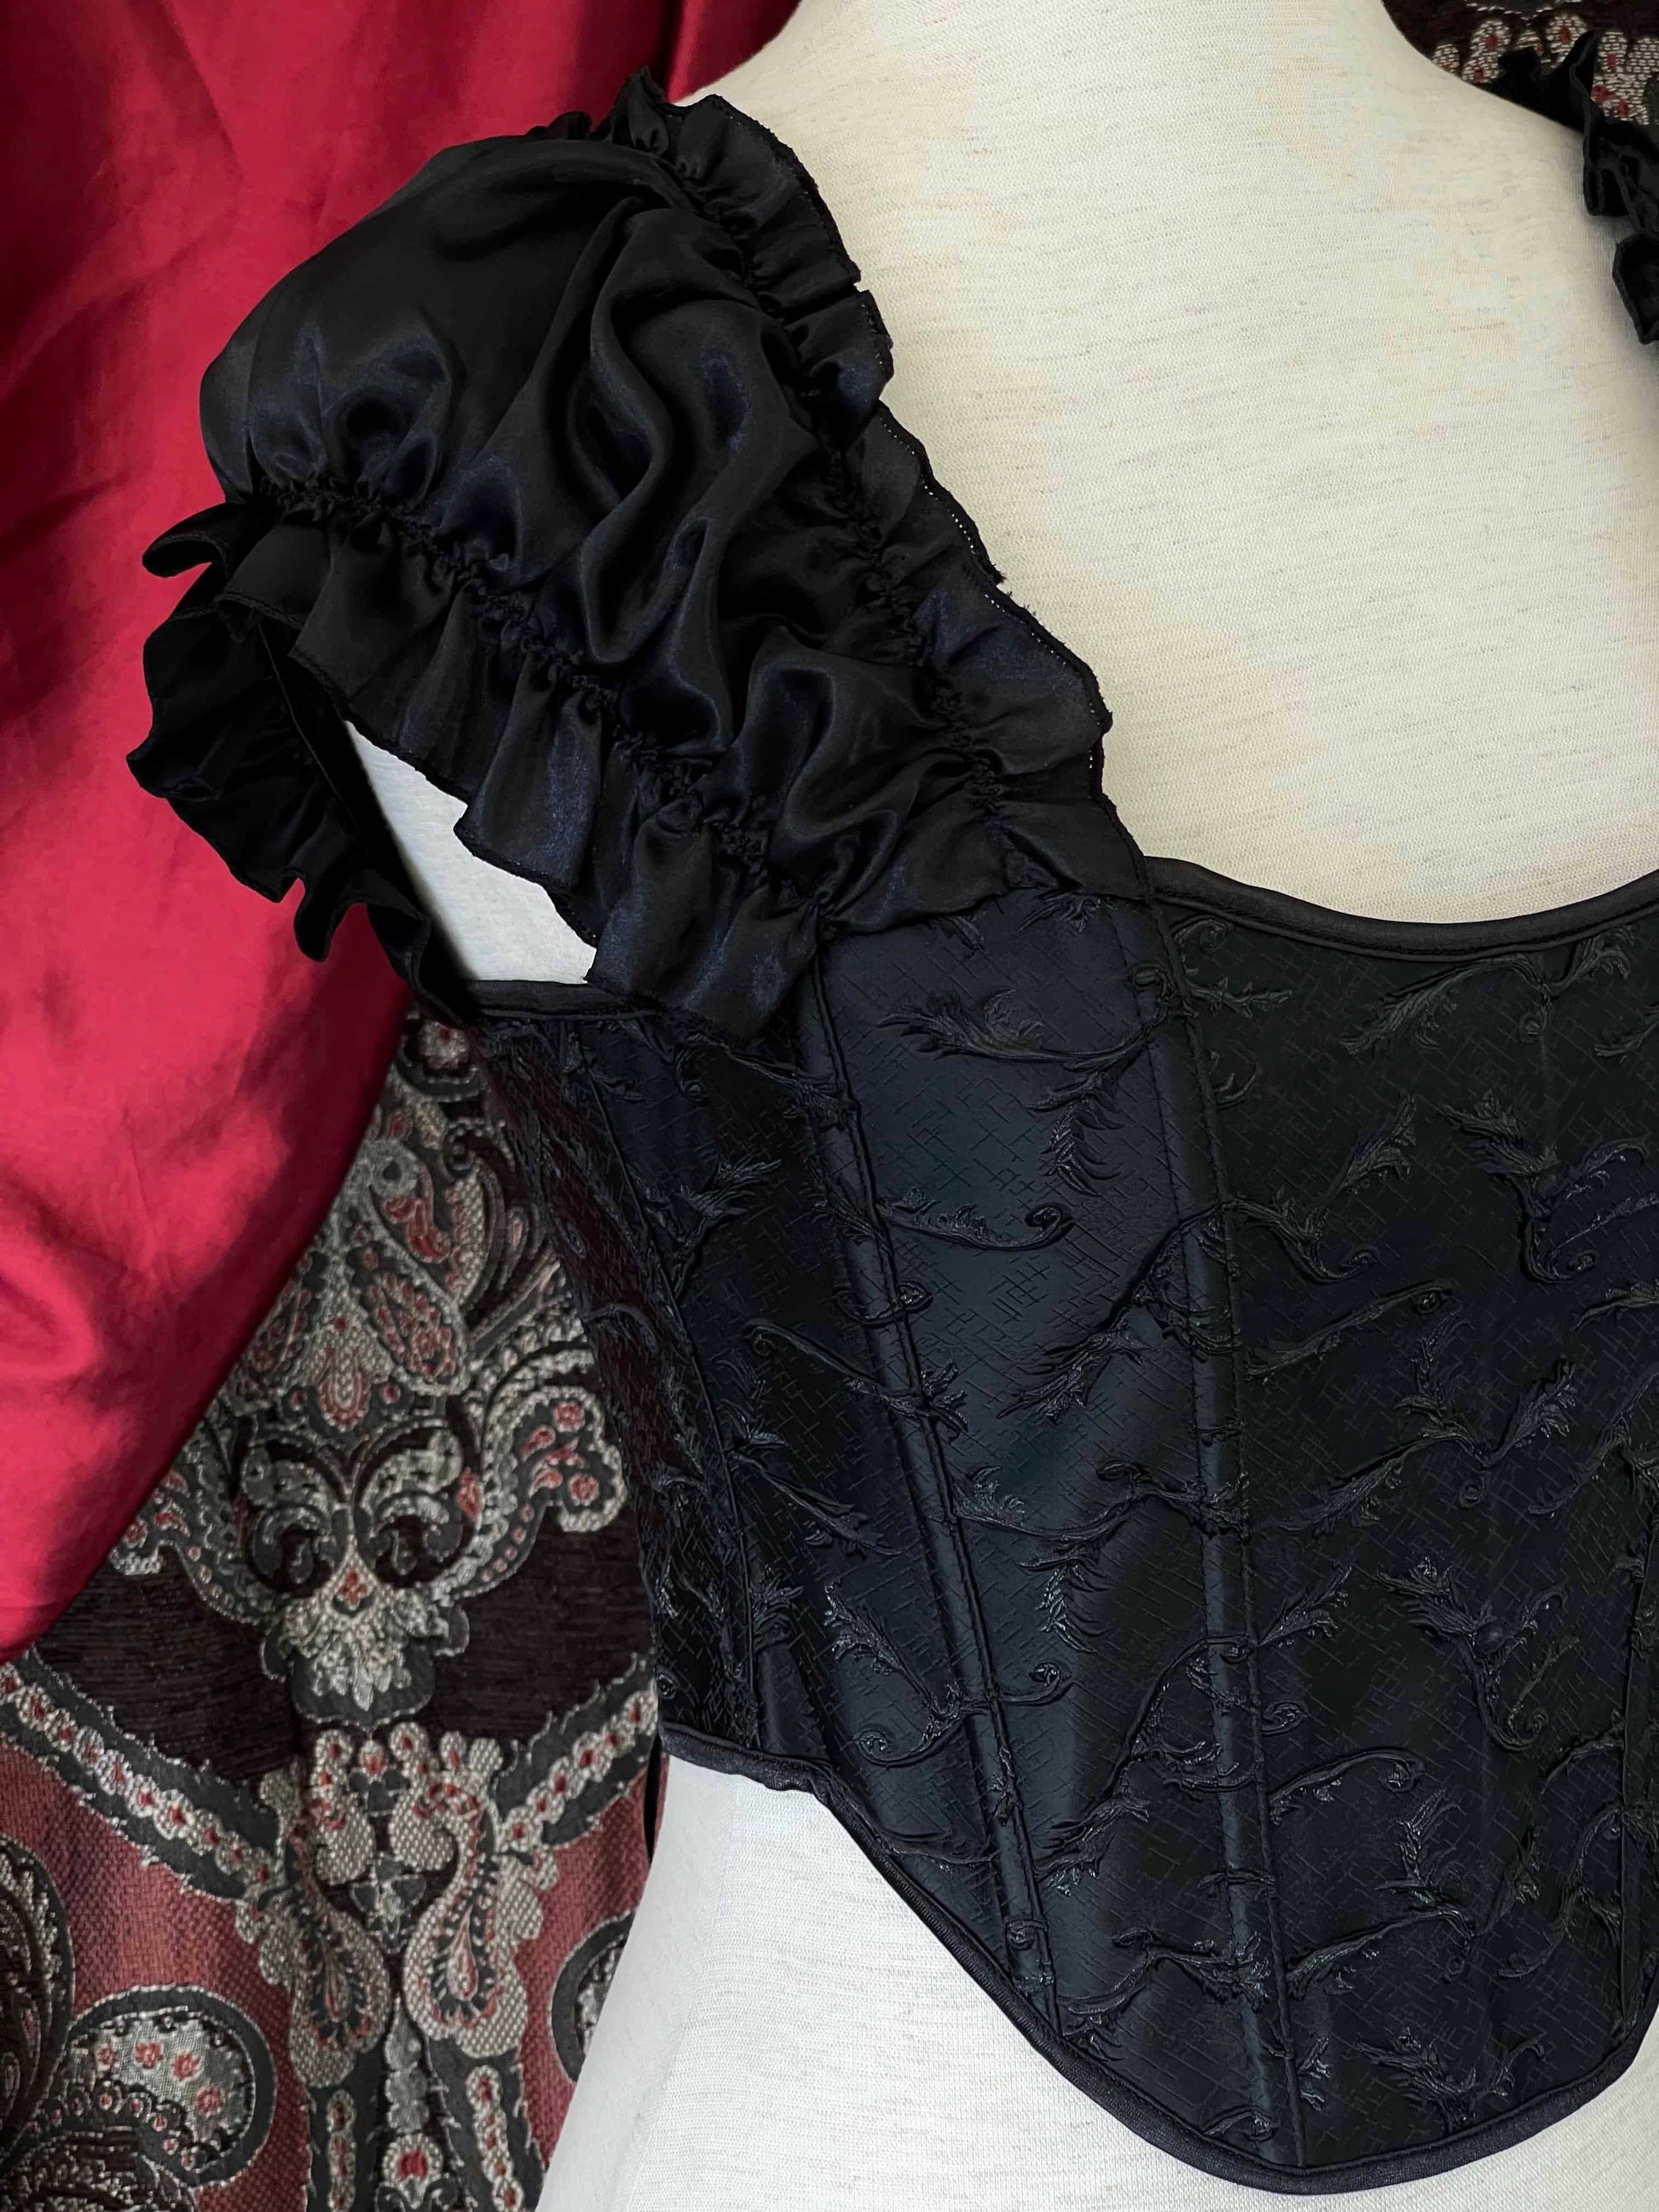 A historically inspired renaissance and baroque era corset  made of black embroidered fabric and puff sleeves is pictured on a mannequin in front of an ornate backdrop.